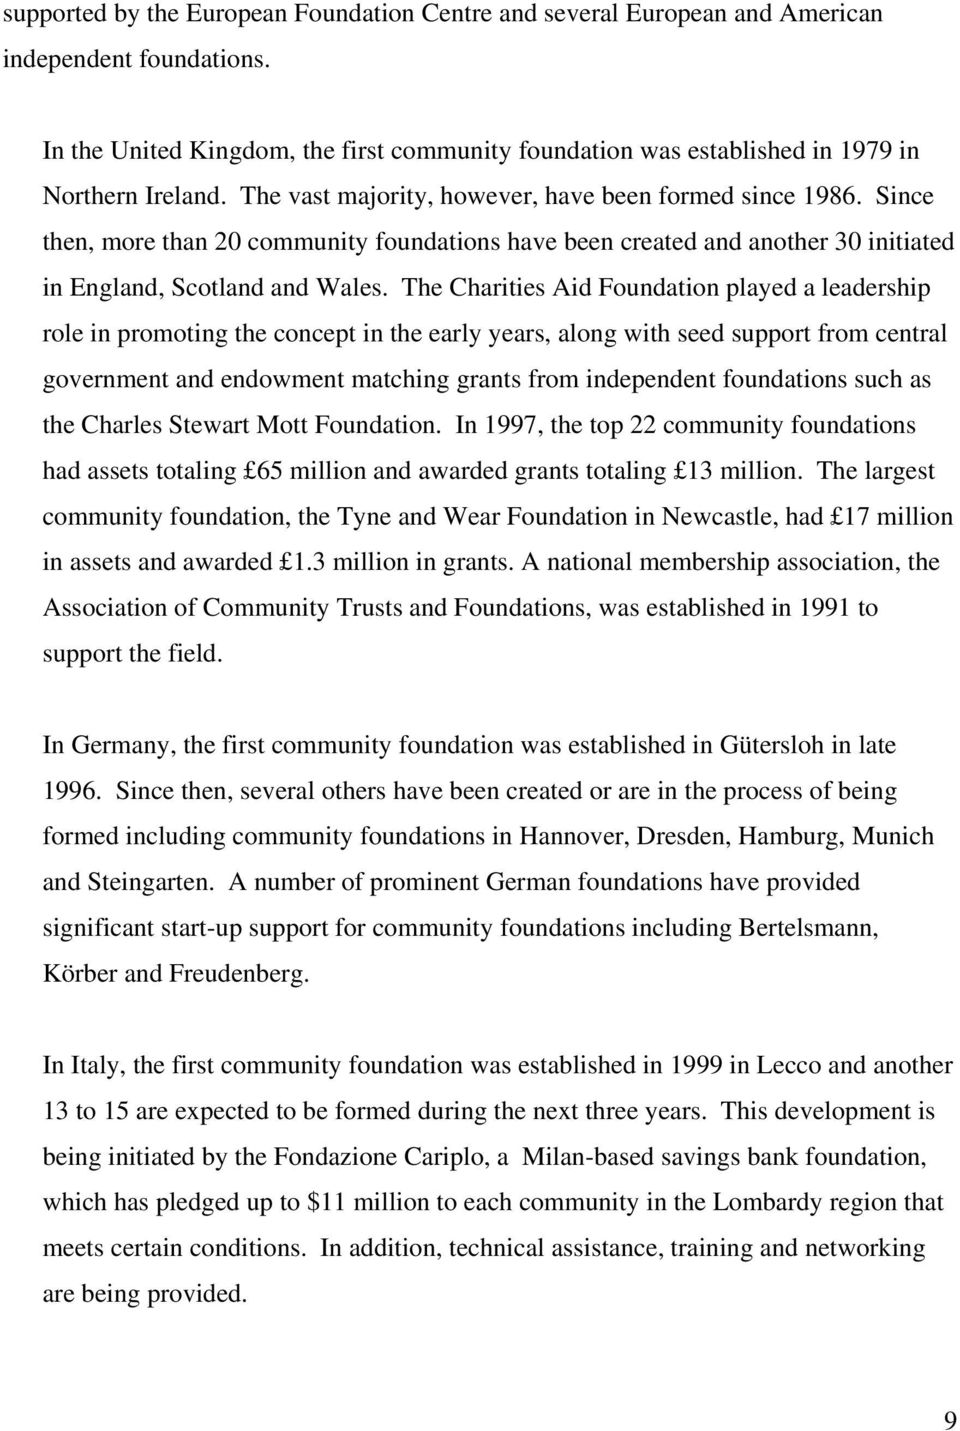 Since then, more than 20 community foundations have been created and another 30 initiated in England, Scotland and Wales.